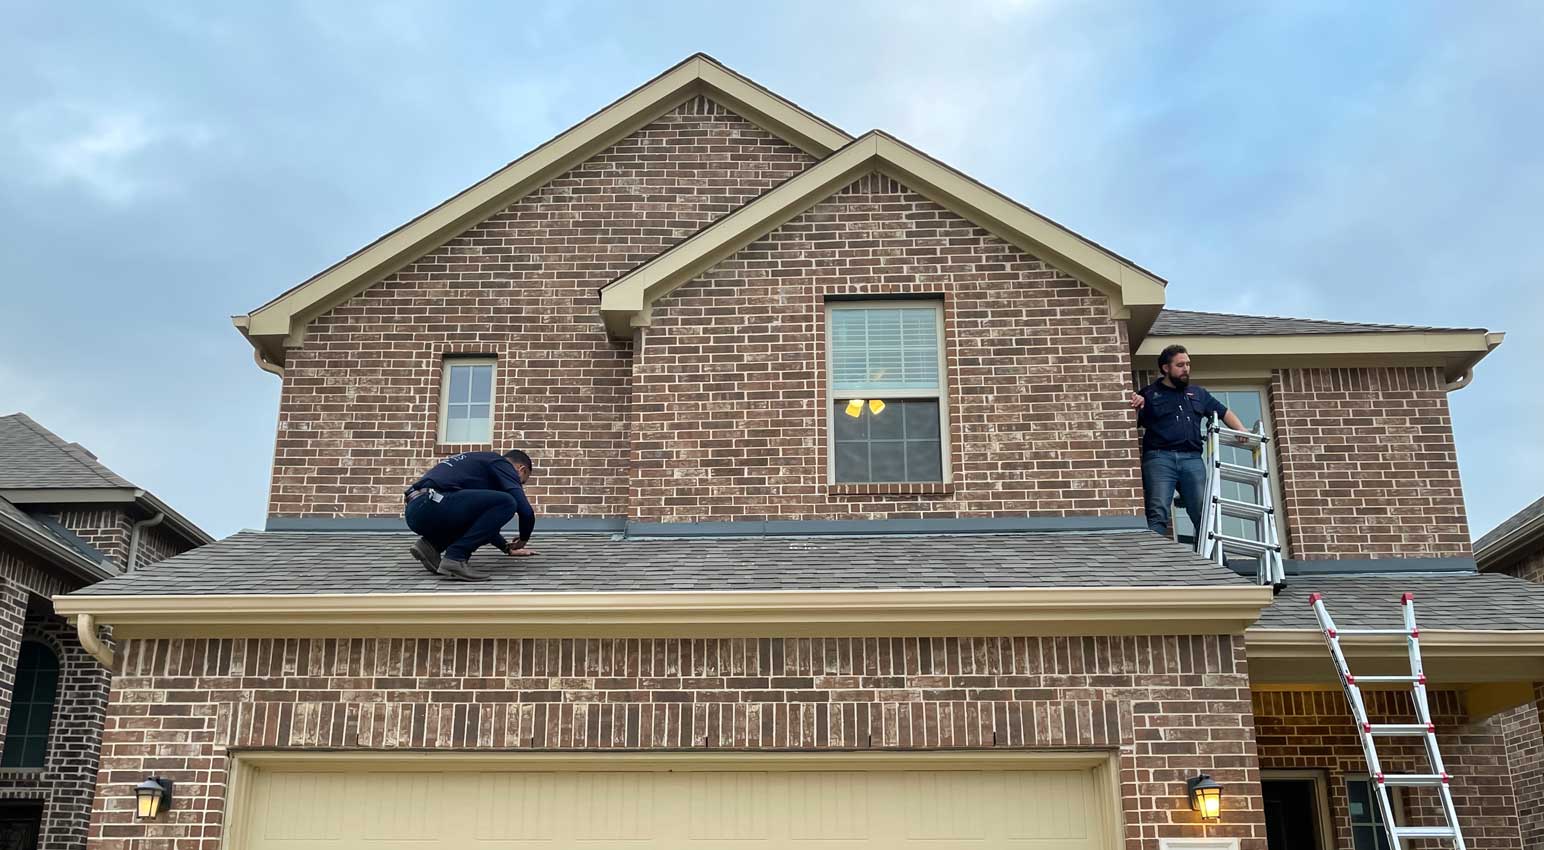 Residential-&-Commercial-Roof-Inspections-in-Macomb